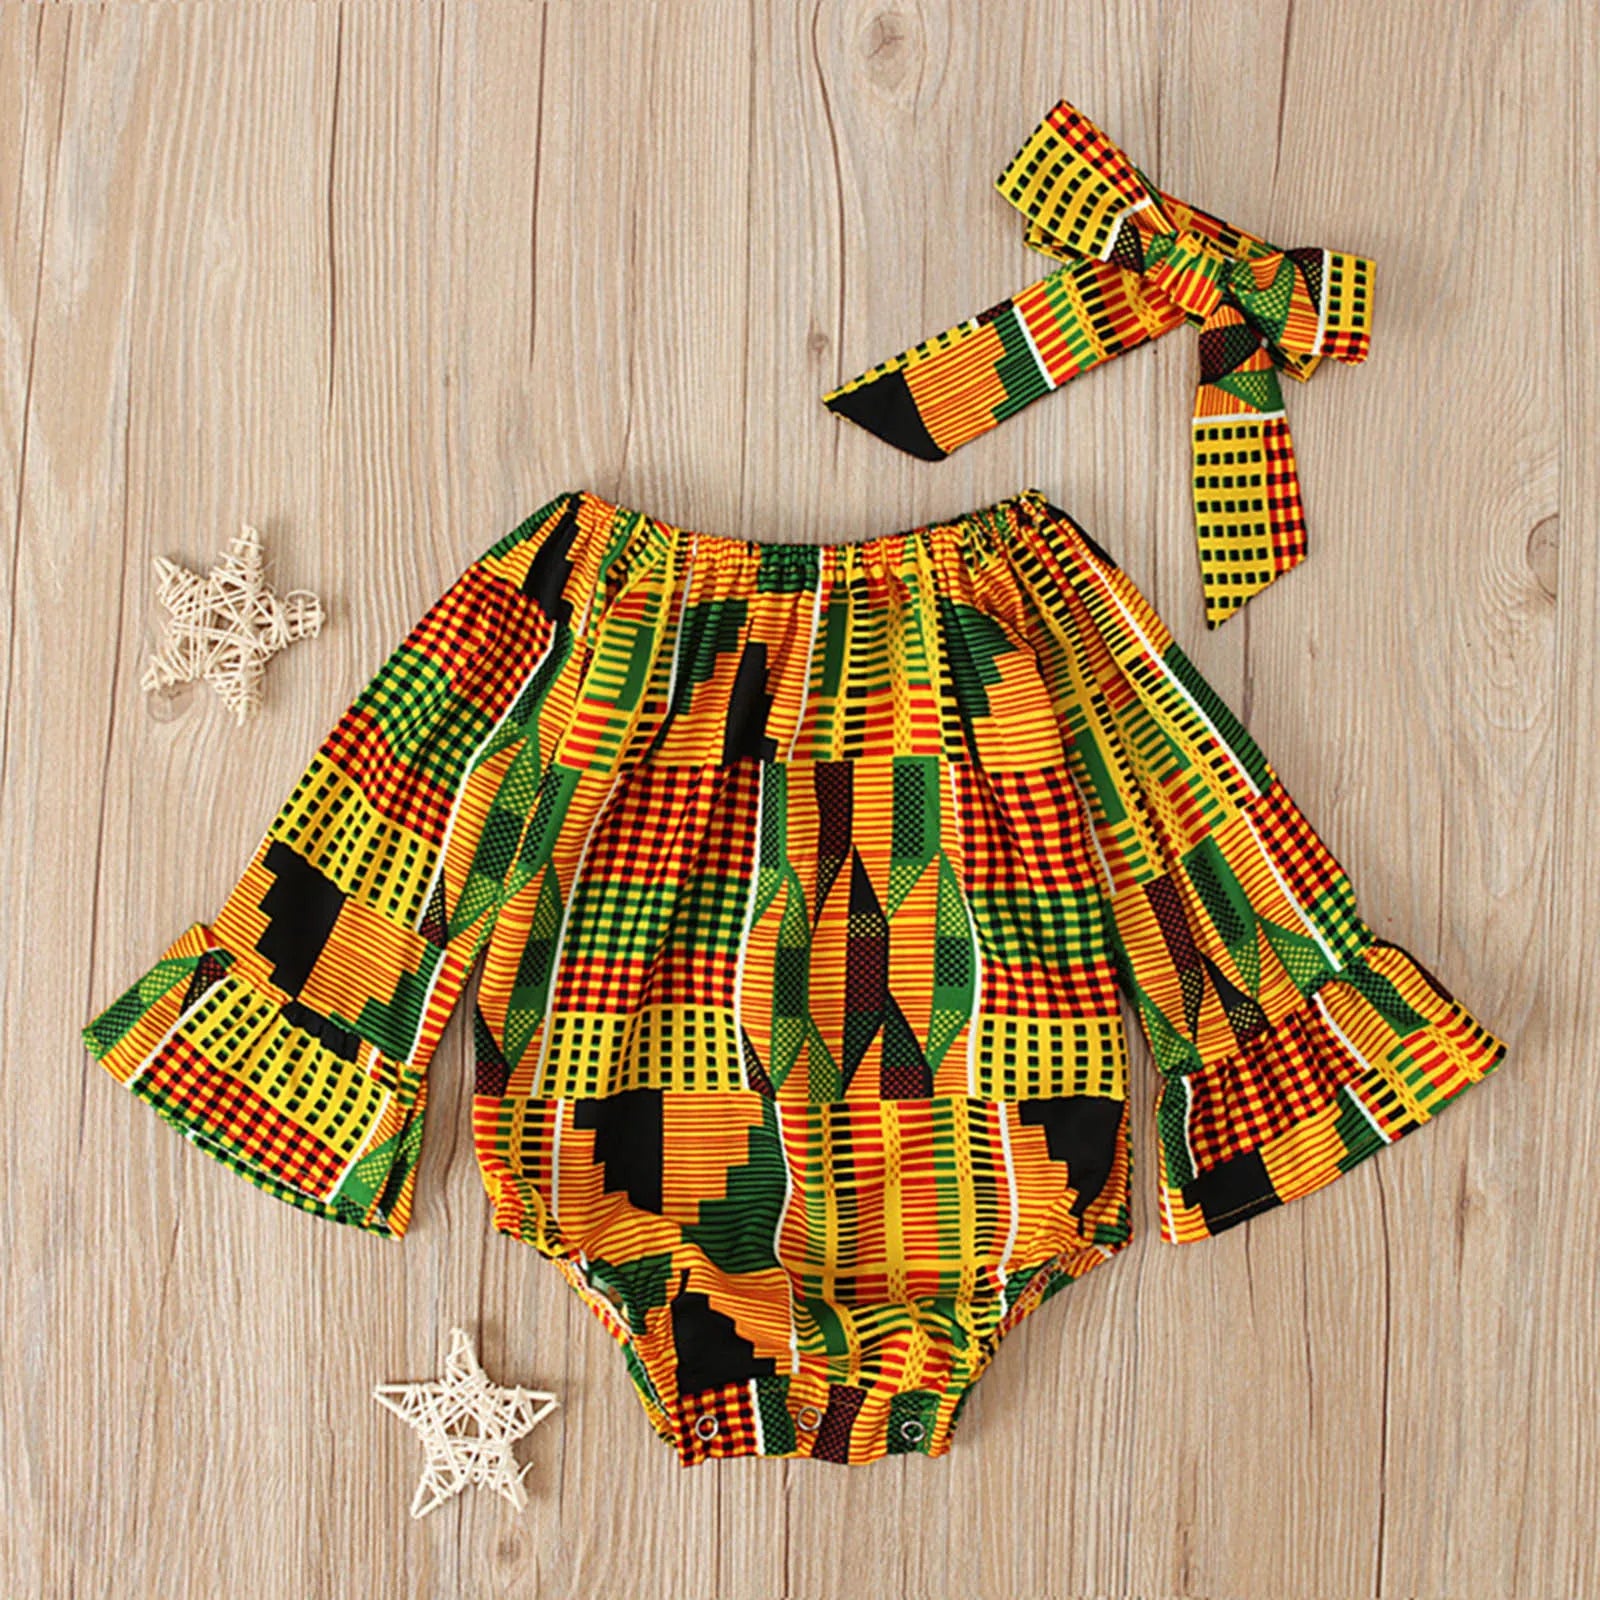 Toddler African Print Off Shoulder Romper+Headband Set Baby Girls Infant Outfits Cute Jumpsuit Hair Band Bodysuits Clothes